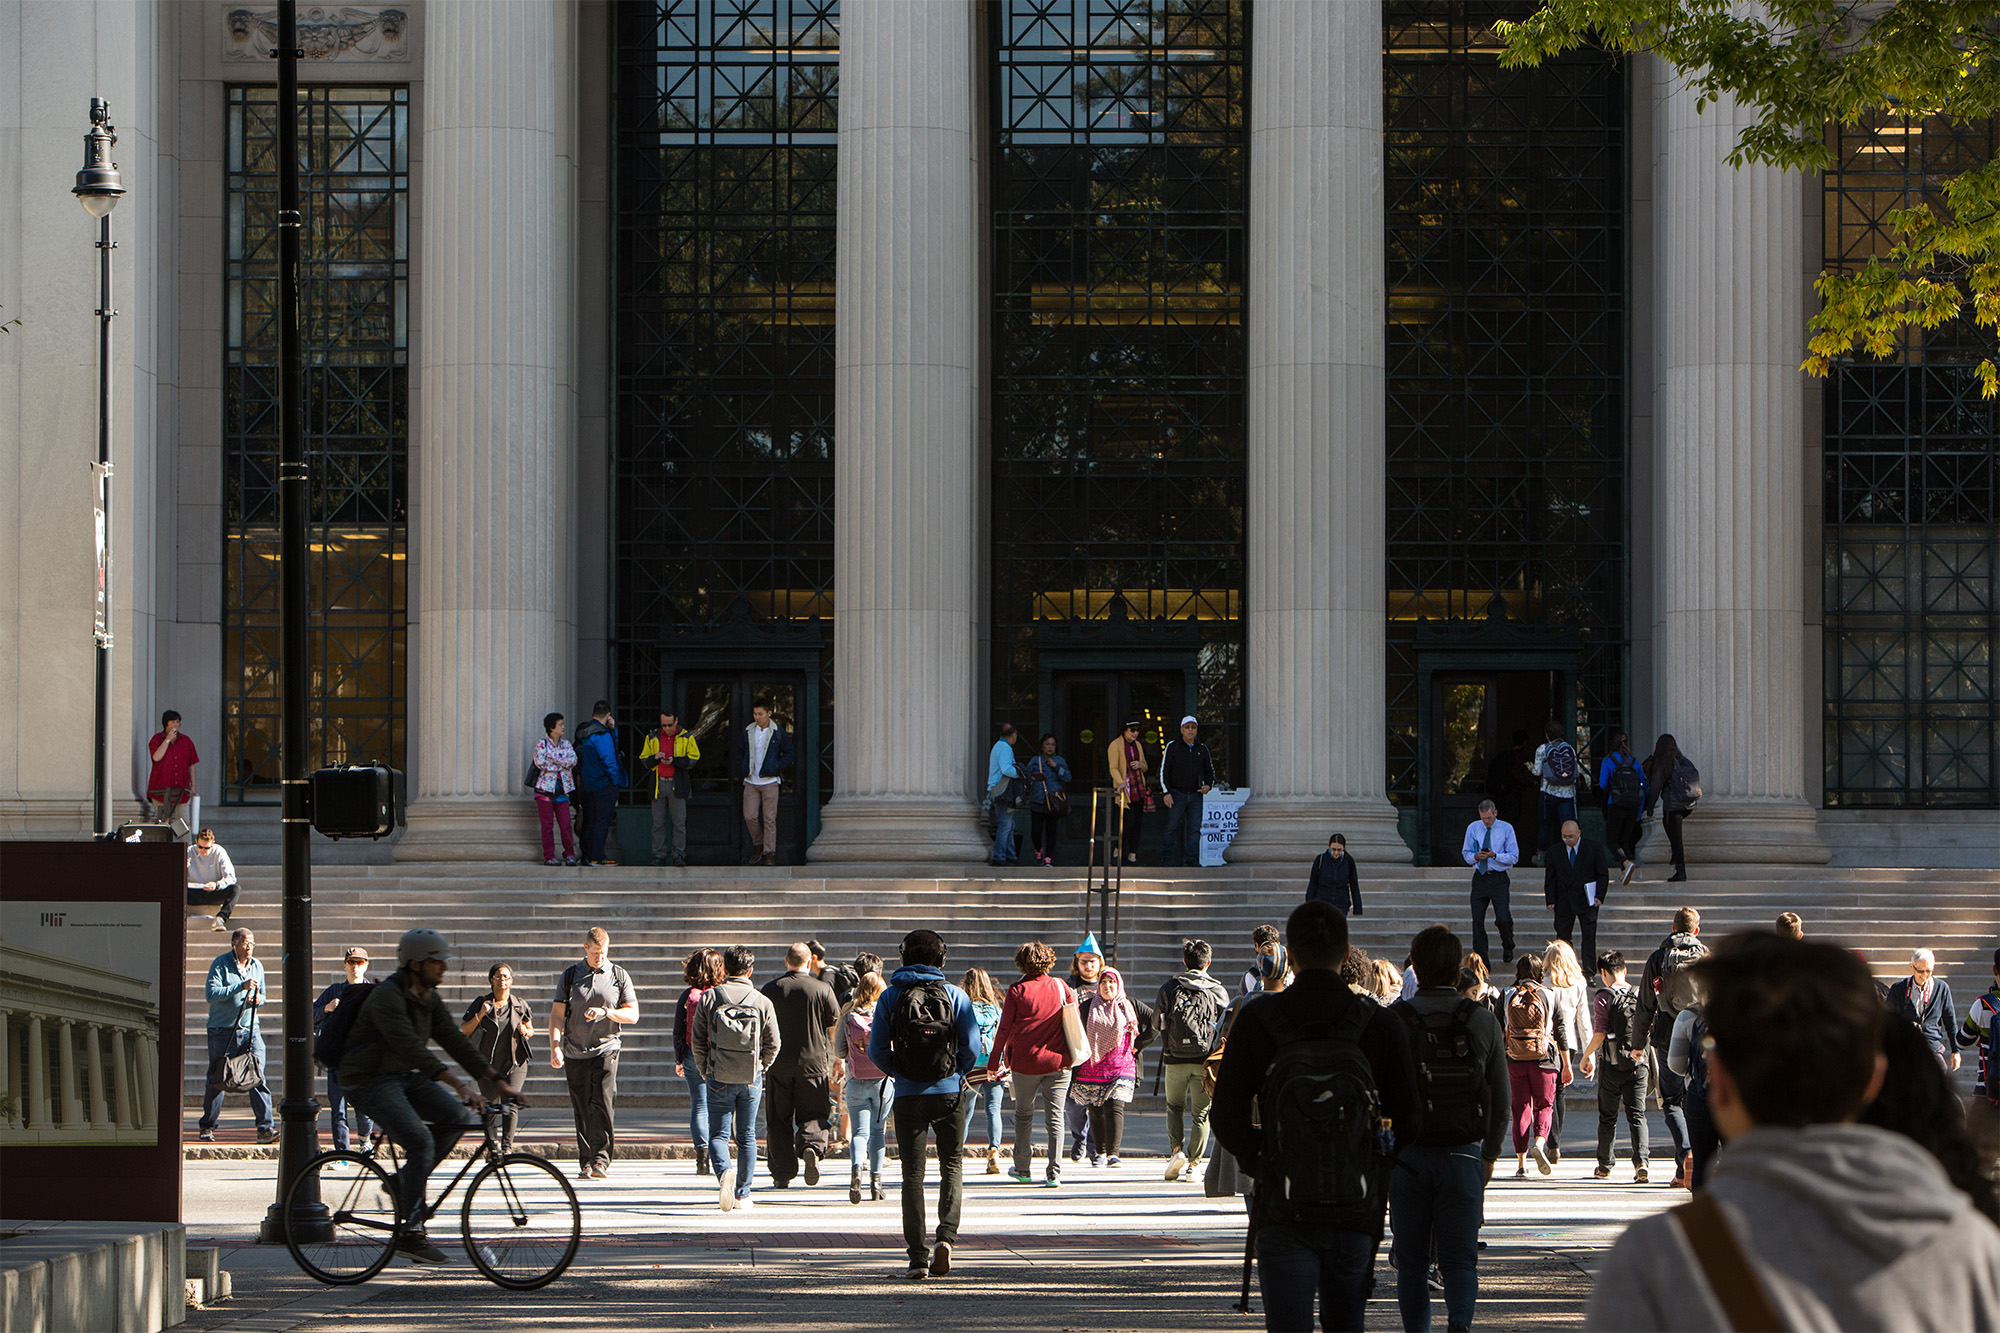 MIT has released a new strategic action plan for belonging, achievement, and composition, intended to help the Institute forge a stronger sense of community and pursue excellence by tapping into talent globally.